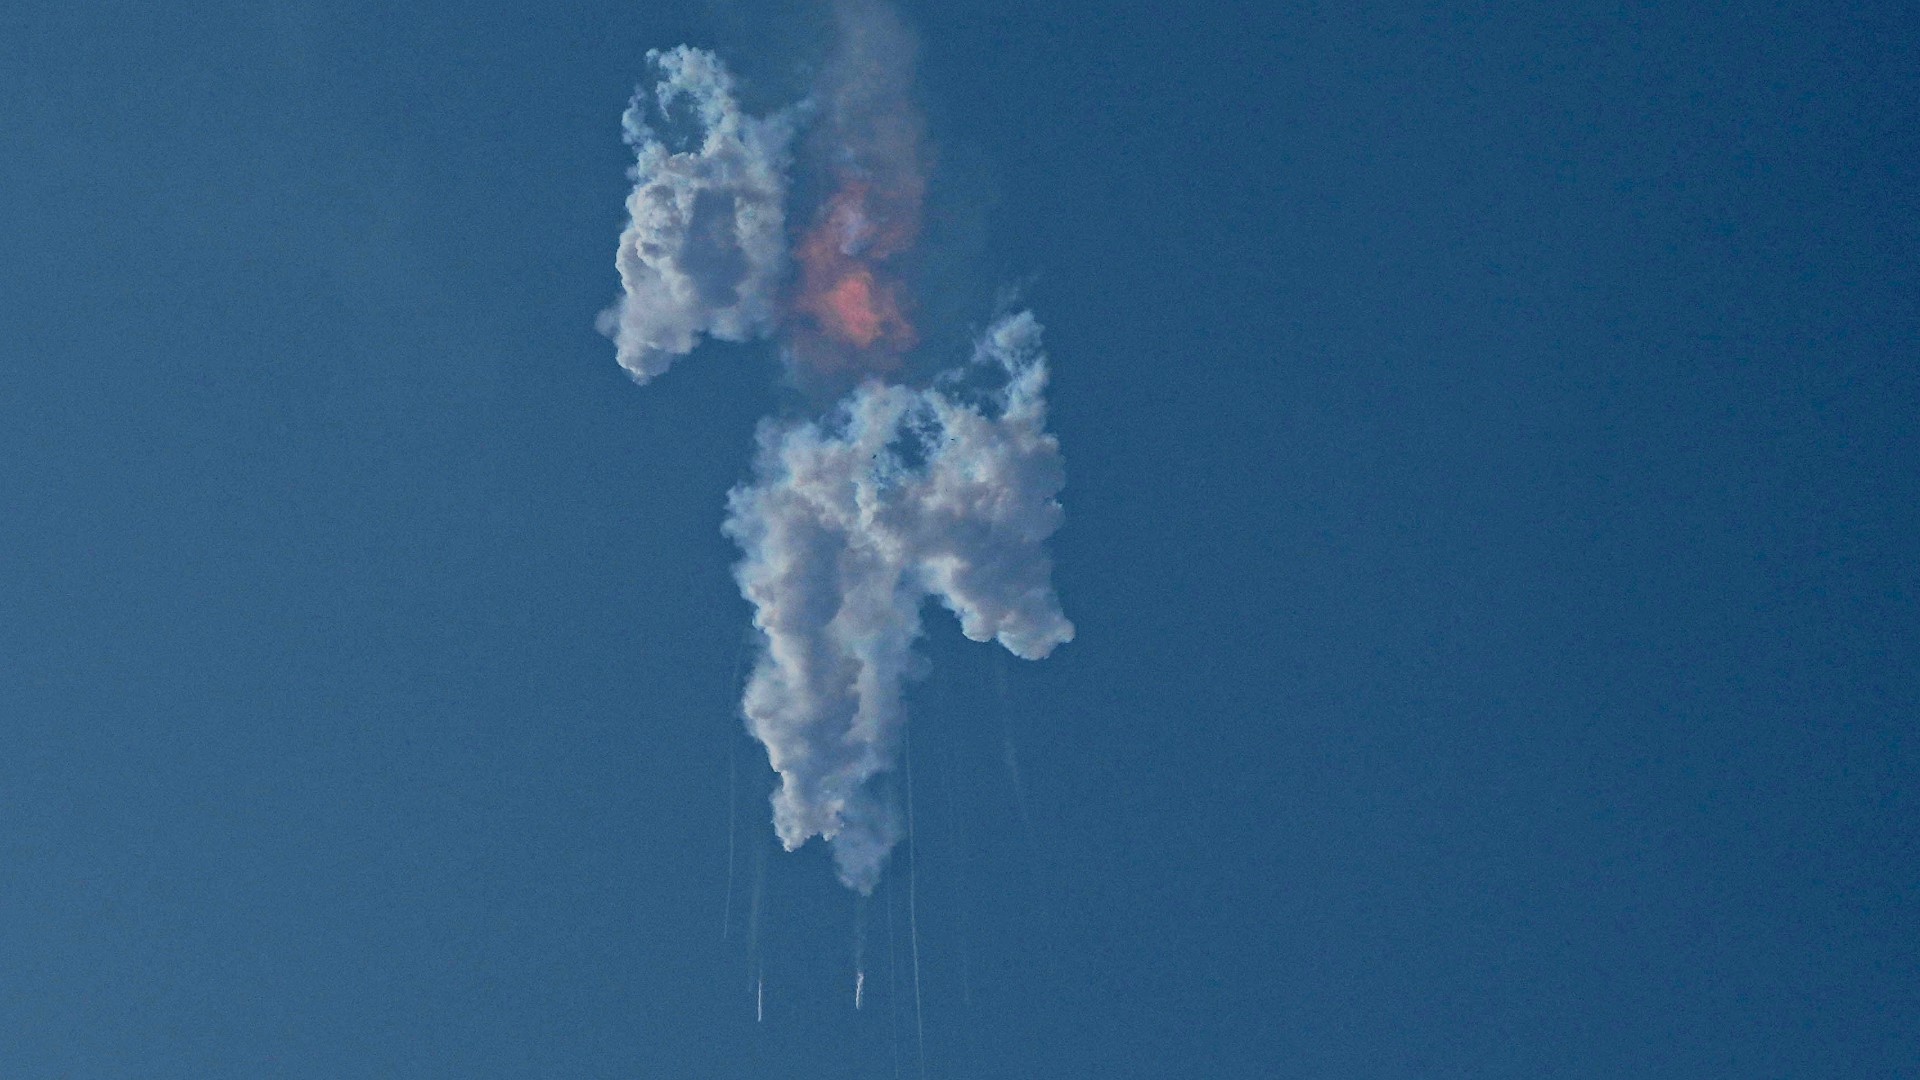 SpaceX’s giant new Starship rocket blasted off on its first test flight Thursday but failed minutes after rising from the launch pad.